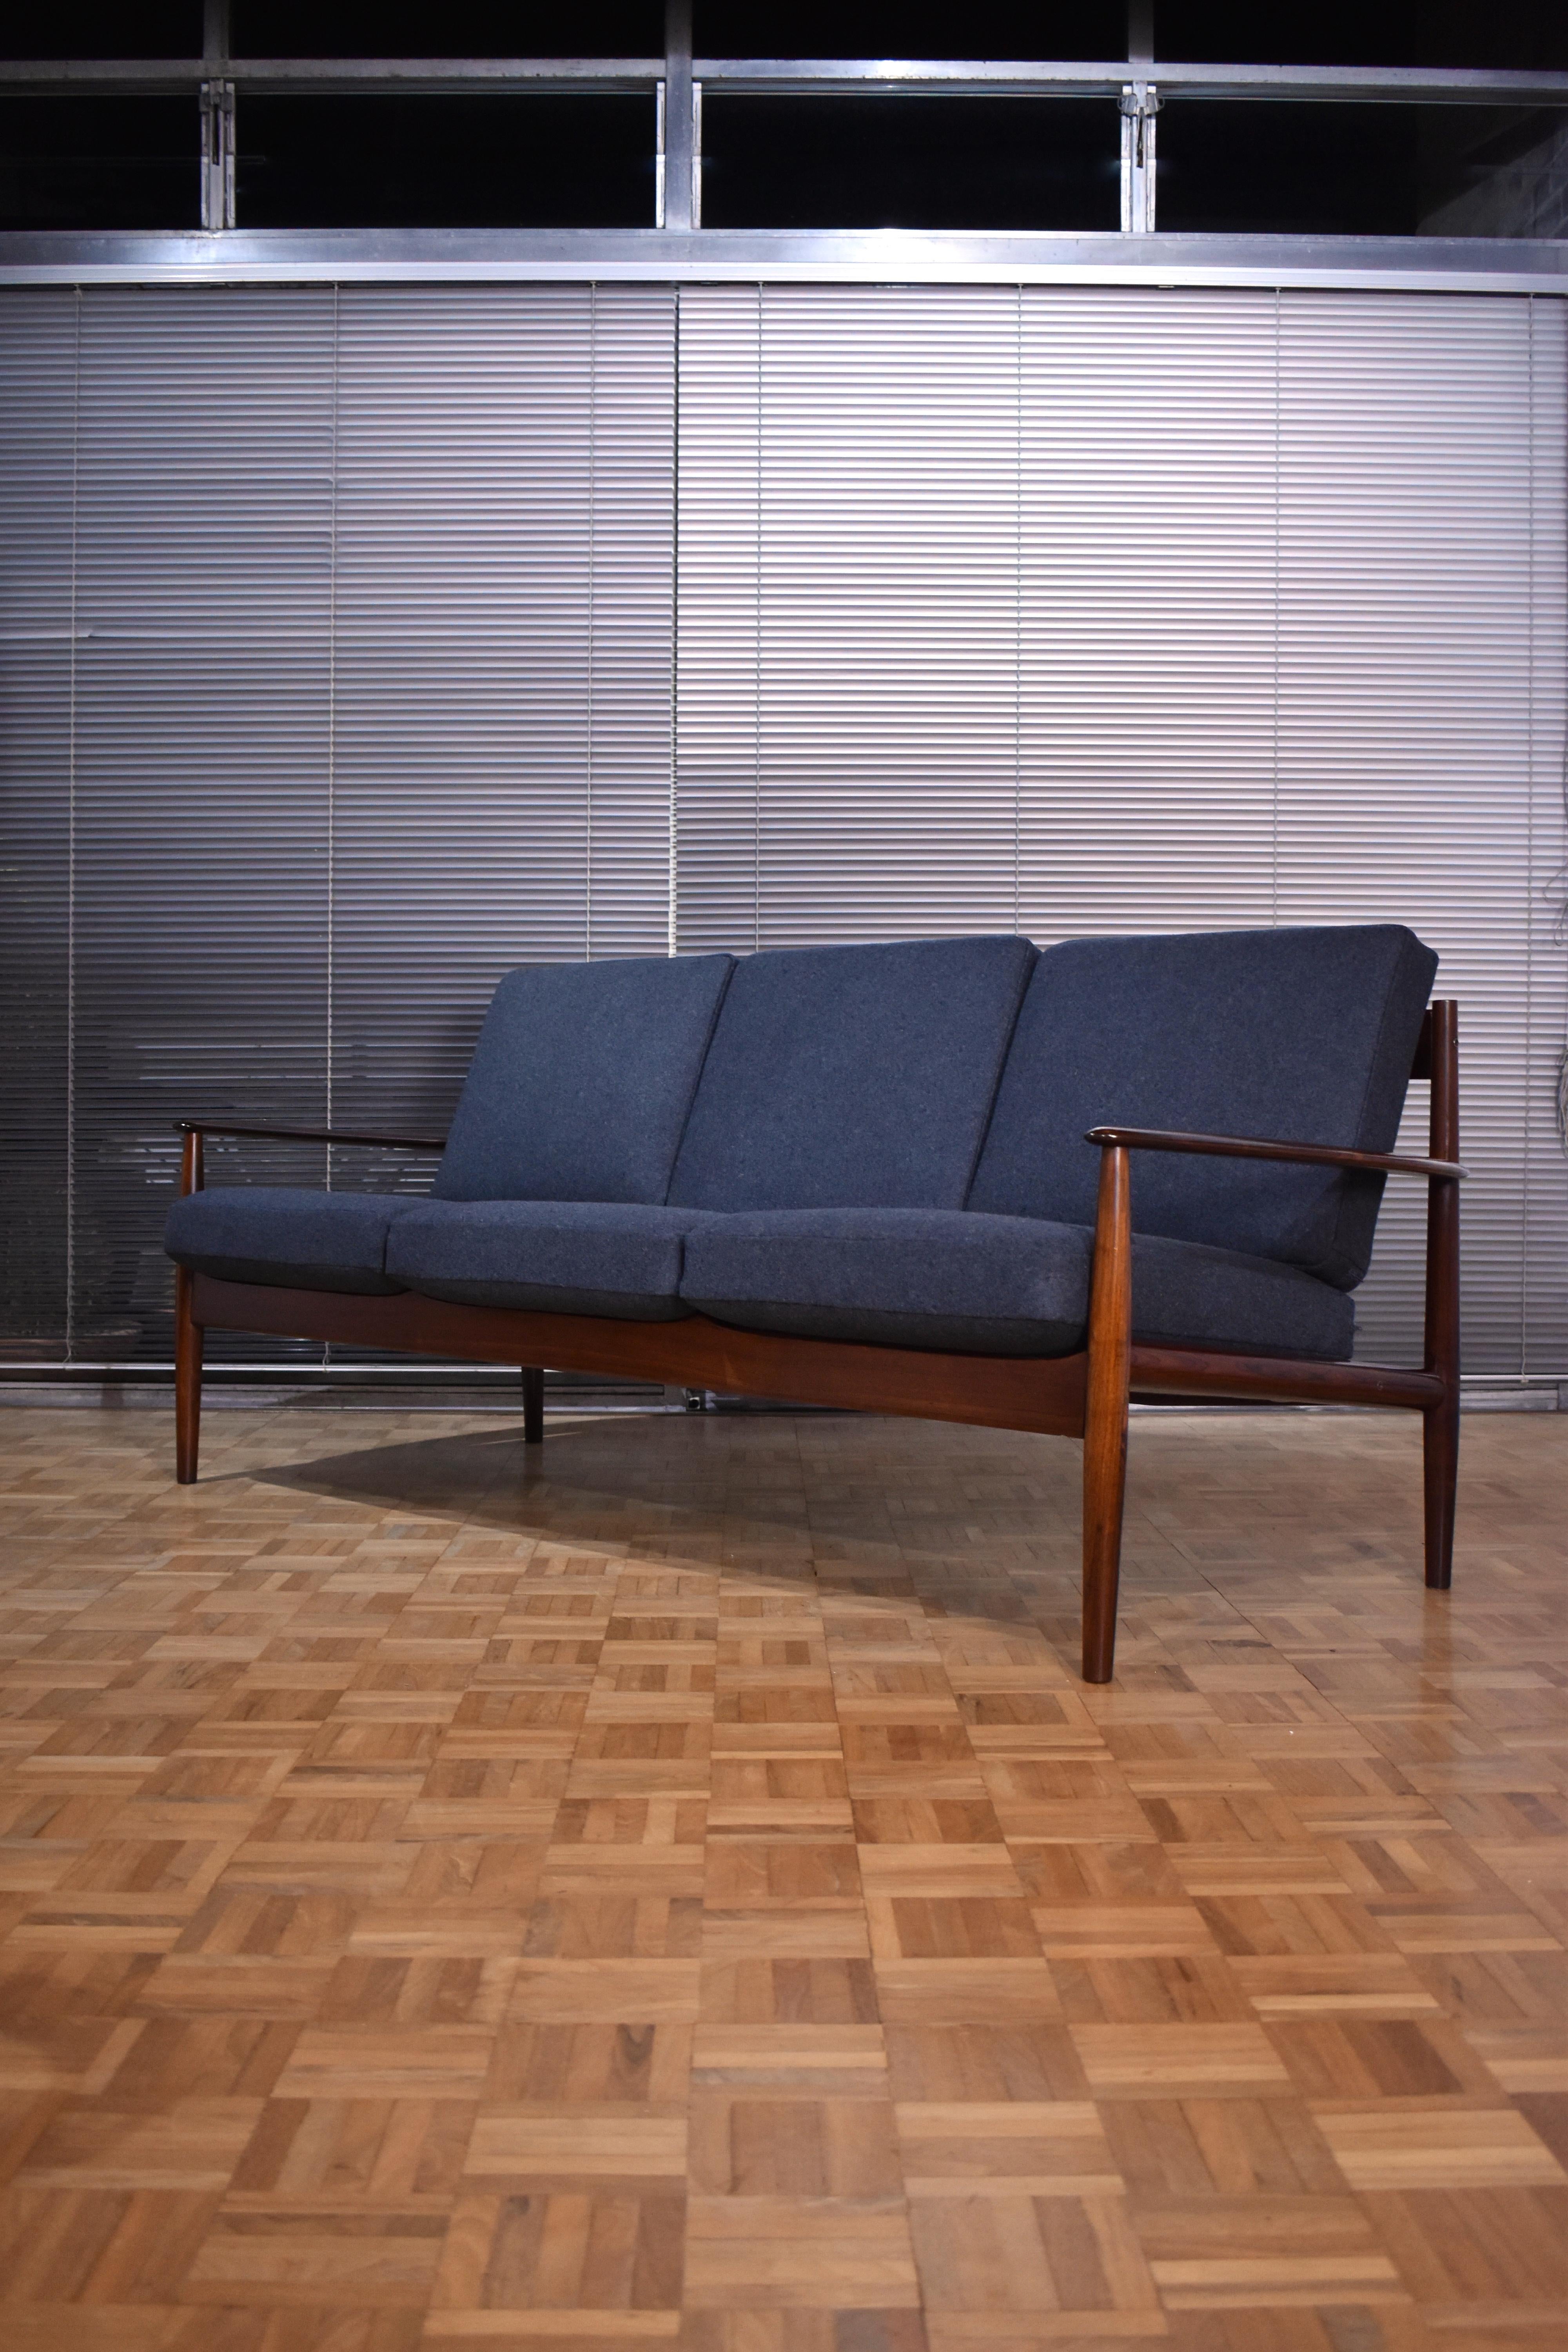 An absolutely stunning three seat sofa designed by Grete Jalk for France & Son, Denmark.

Only a small number of these sofas were produced in Rosewood in the mid to late 60's making them incredibly scarce. 

The Brazilian rosewood has